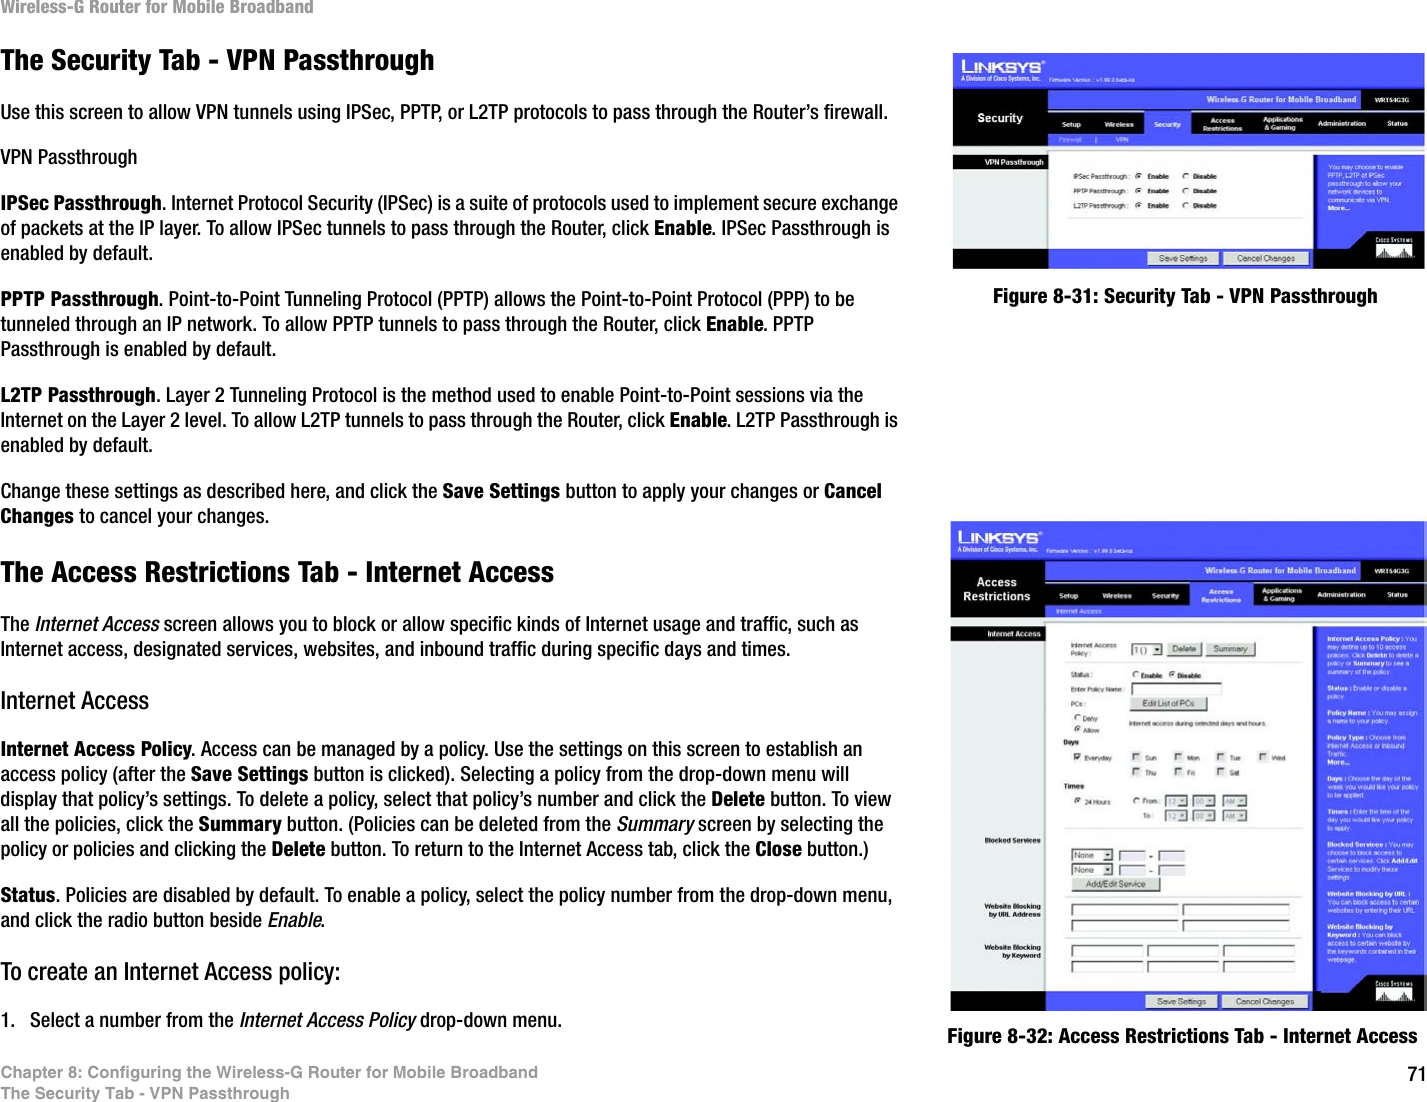 71Chapter 8: Configuring the Wireless-G Router for Mobile BroadbandThe Security Tab - VPN PassthroughWireless-G Router for Mobile BroadbandThe Security Tab - VPN PassthroughUse this screen to allow VPN tunnels using IPSec, PPTP, or L2TP protocols to pass through the Router’s firewall.VPN PassthroughIPSec Passthrough. Internet Protocol Security (IPSec) is a suite of protocols used to implement secure exchange of packets at the IP layer. To allow IPSec tunnels to pass through the Router, click Enable. IPSec Passthrough is enabled by default. PPTP Passthrough. Point-to-Point Tunneling Protocol (PPTP) allows the Point-to-Point Protocol (PPP) to be tunneled through an IP network. To allow PPTP tunnels to pass through the Router, click Enable. PPTP Passthrough is enabled by default.L2TP Passthrough. Layer 2 Tunneling Protocol is the method used to enable Point-to-Point sessions via the Internet on the Layer 2 level. To allow L2TP tunnels to pass through the Router, click Enable. L2TP Passthrough is enabled by default.Change these settings as described here, and click the Save Settings button to apply your changes or Cancel Changes to cancel your changes. The Access Restrictions Tab - Internet AccessThe Internet Access screen allows you to block or allow specific kinds of Internet usage and traffic, such as Internet access, designated services, websites, and inbound traffic during specific days and times.Internet AccessInternet Access Policy. Access can be managed by a policy. Use the settings on this screen to establish an access policy (after the Save Settings button is clicked). Selecting a policy from the drop-down menu will display that policy’s settings. To delete a policy, select that policy’s number and click the Delete button. To view all the policies, click the Summary button. (Policies can be deleted from the Summary screen by selecting the policy or policies and clicking the Delete button. To return to the Internet Access tab, click the Close button.)Status. Policies are disabled by default. To enable a policy, select the policy number from the drop-down menu, and click the radio button beside Enable.To create an Internet Access policy:1. Select a number from the Internet Access Policy drop-down menu. Figure 8-32: Access Restrictions Tab - Internet AccessFigure 8-31: Security Tab - VPN Passthrough